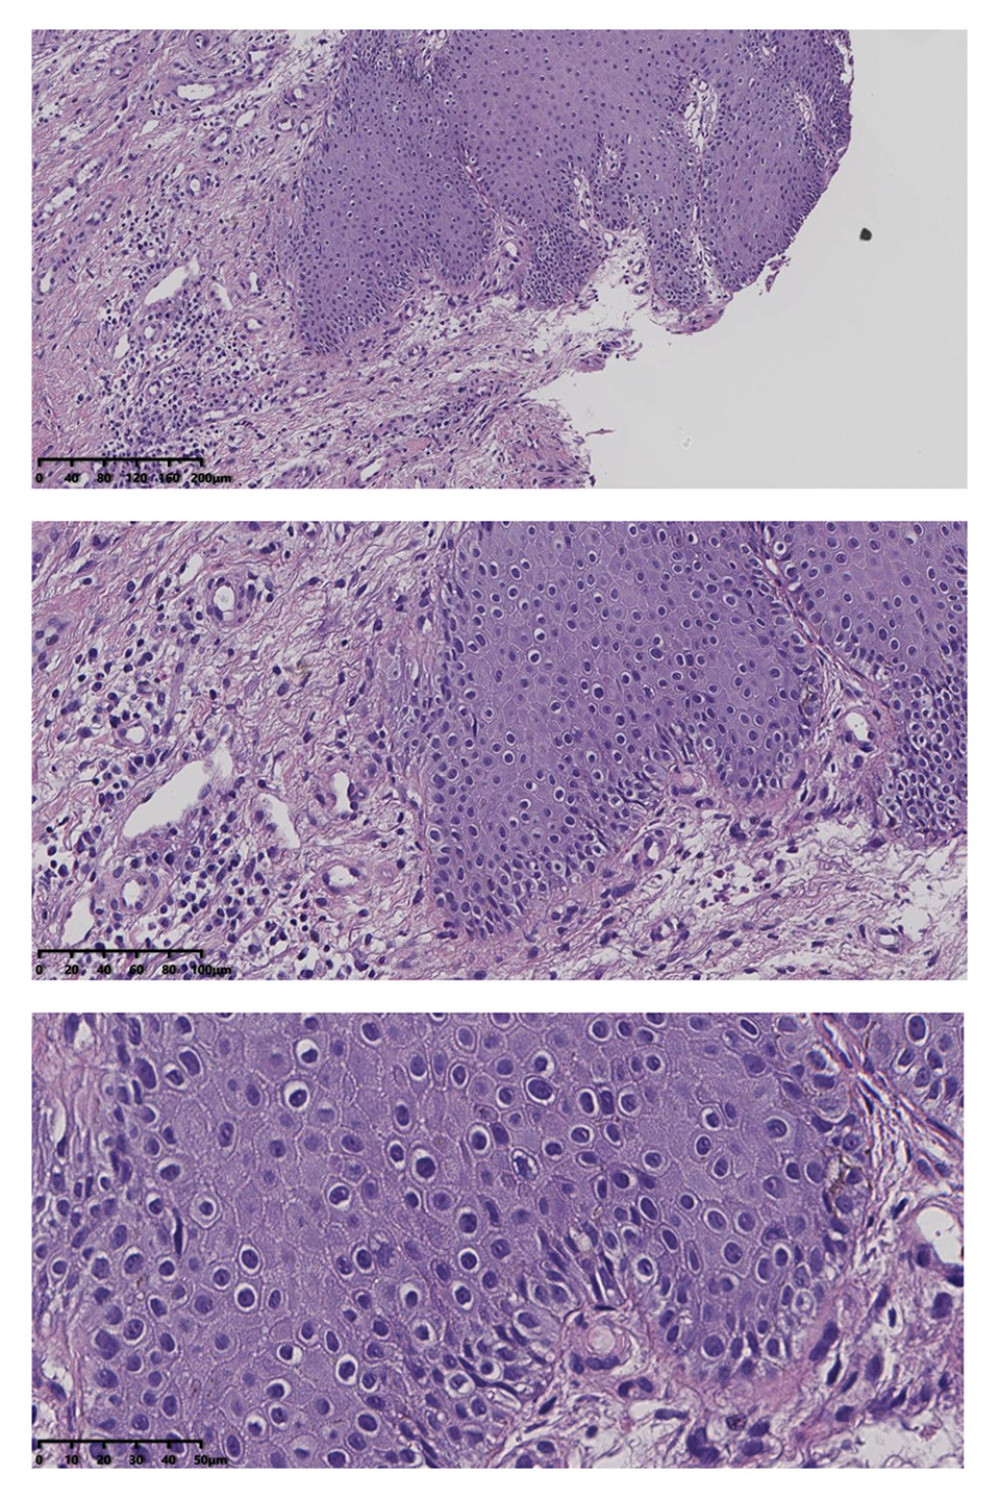 Squamous epithelial atrophy, acellular collagen degeneration zone in the superficial dermis, and inflammatory cell infiltration, consistent with vulvar sclerosing lichen.